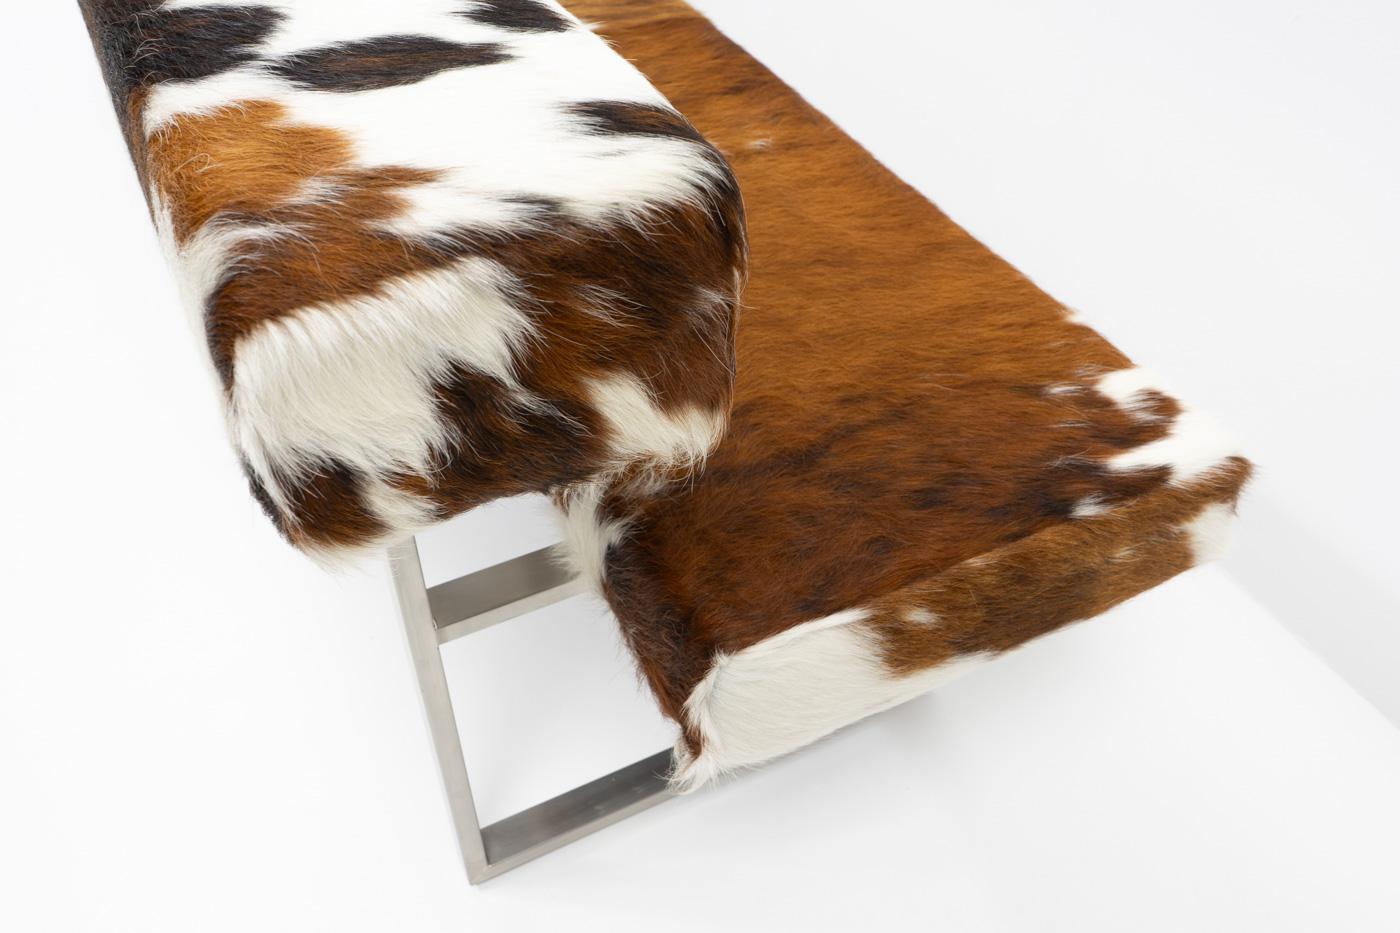 Swiss Design Permesso Bench in cowhide, by Girsberger - 2000s For Sale 7